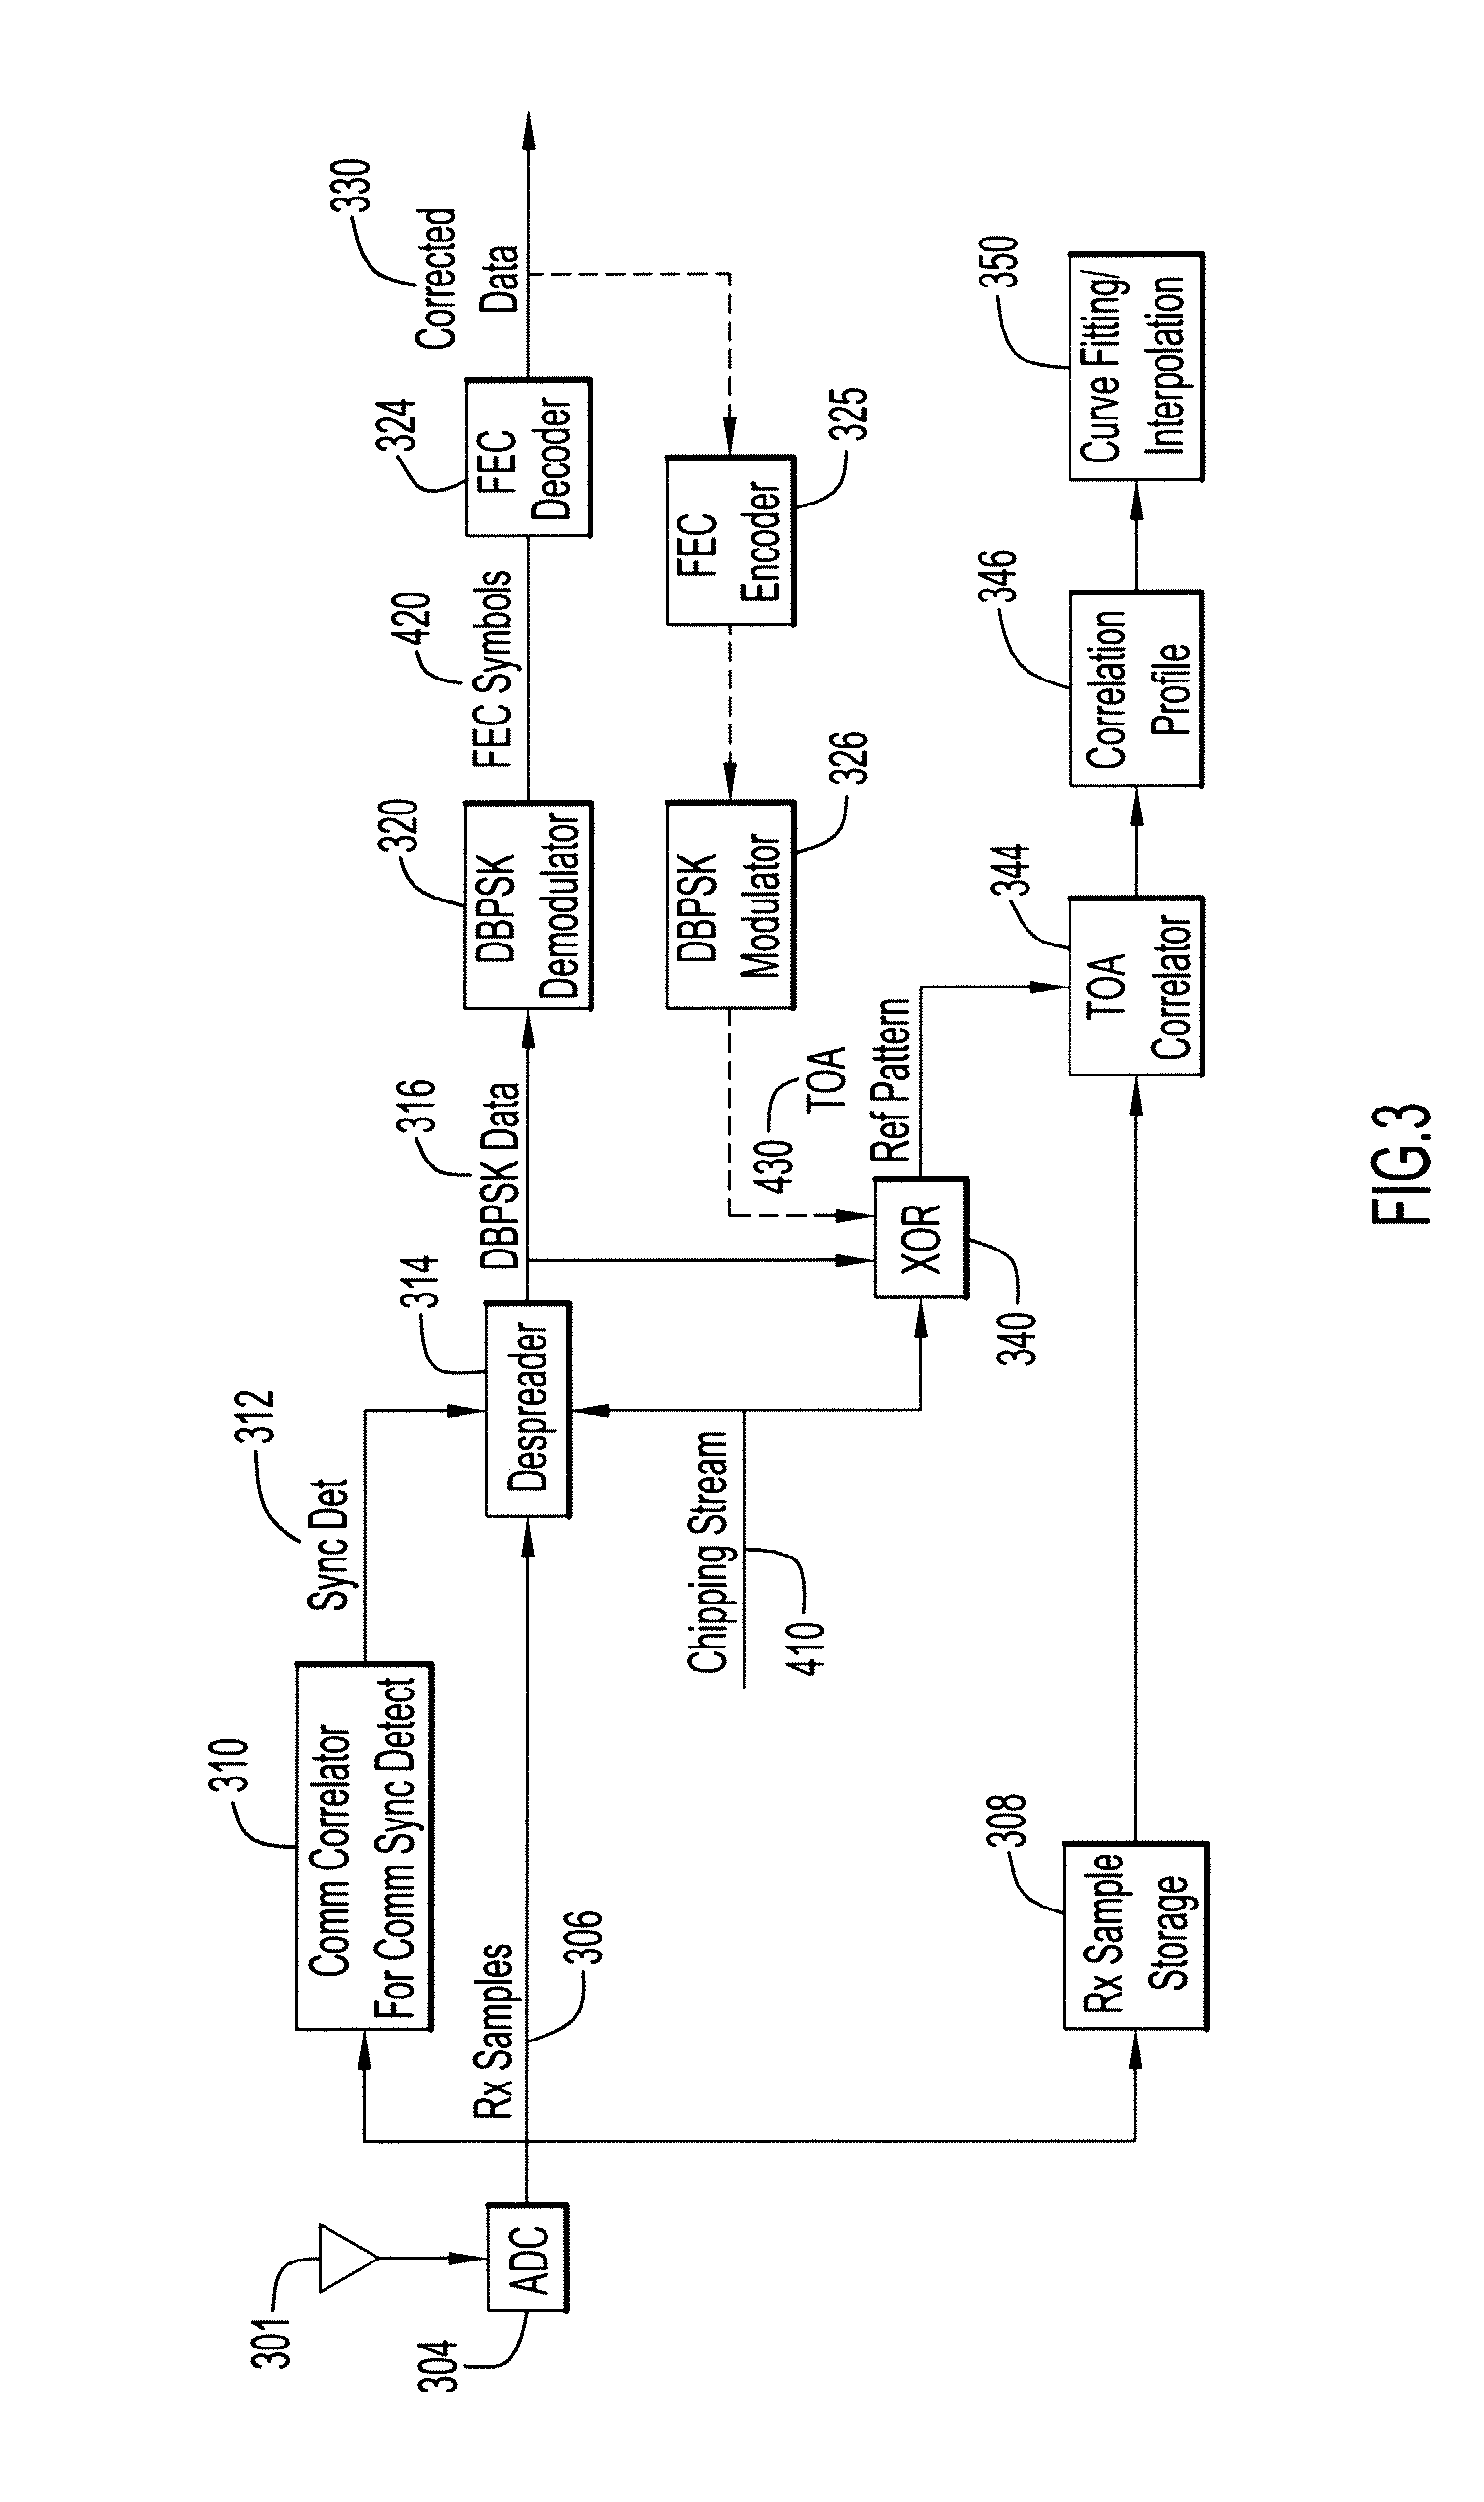 Ranging Between Radios Using Pseudo Time of Arrival Sequence